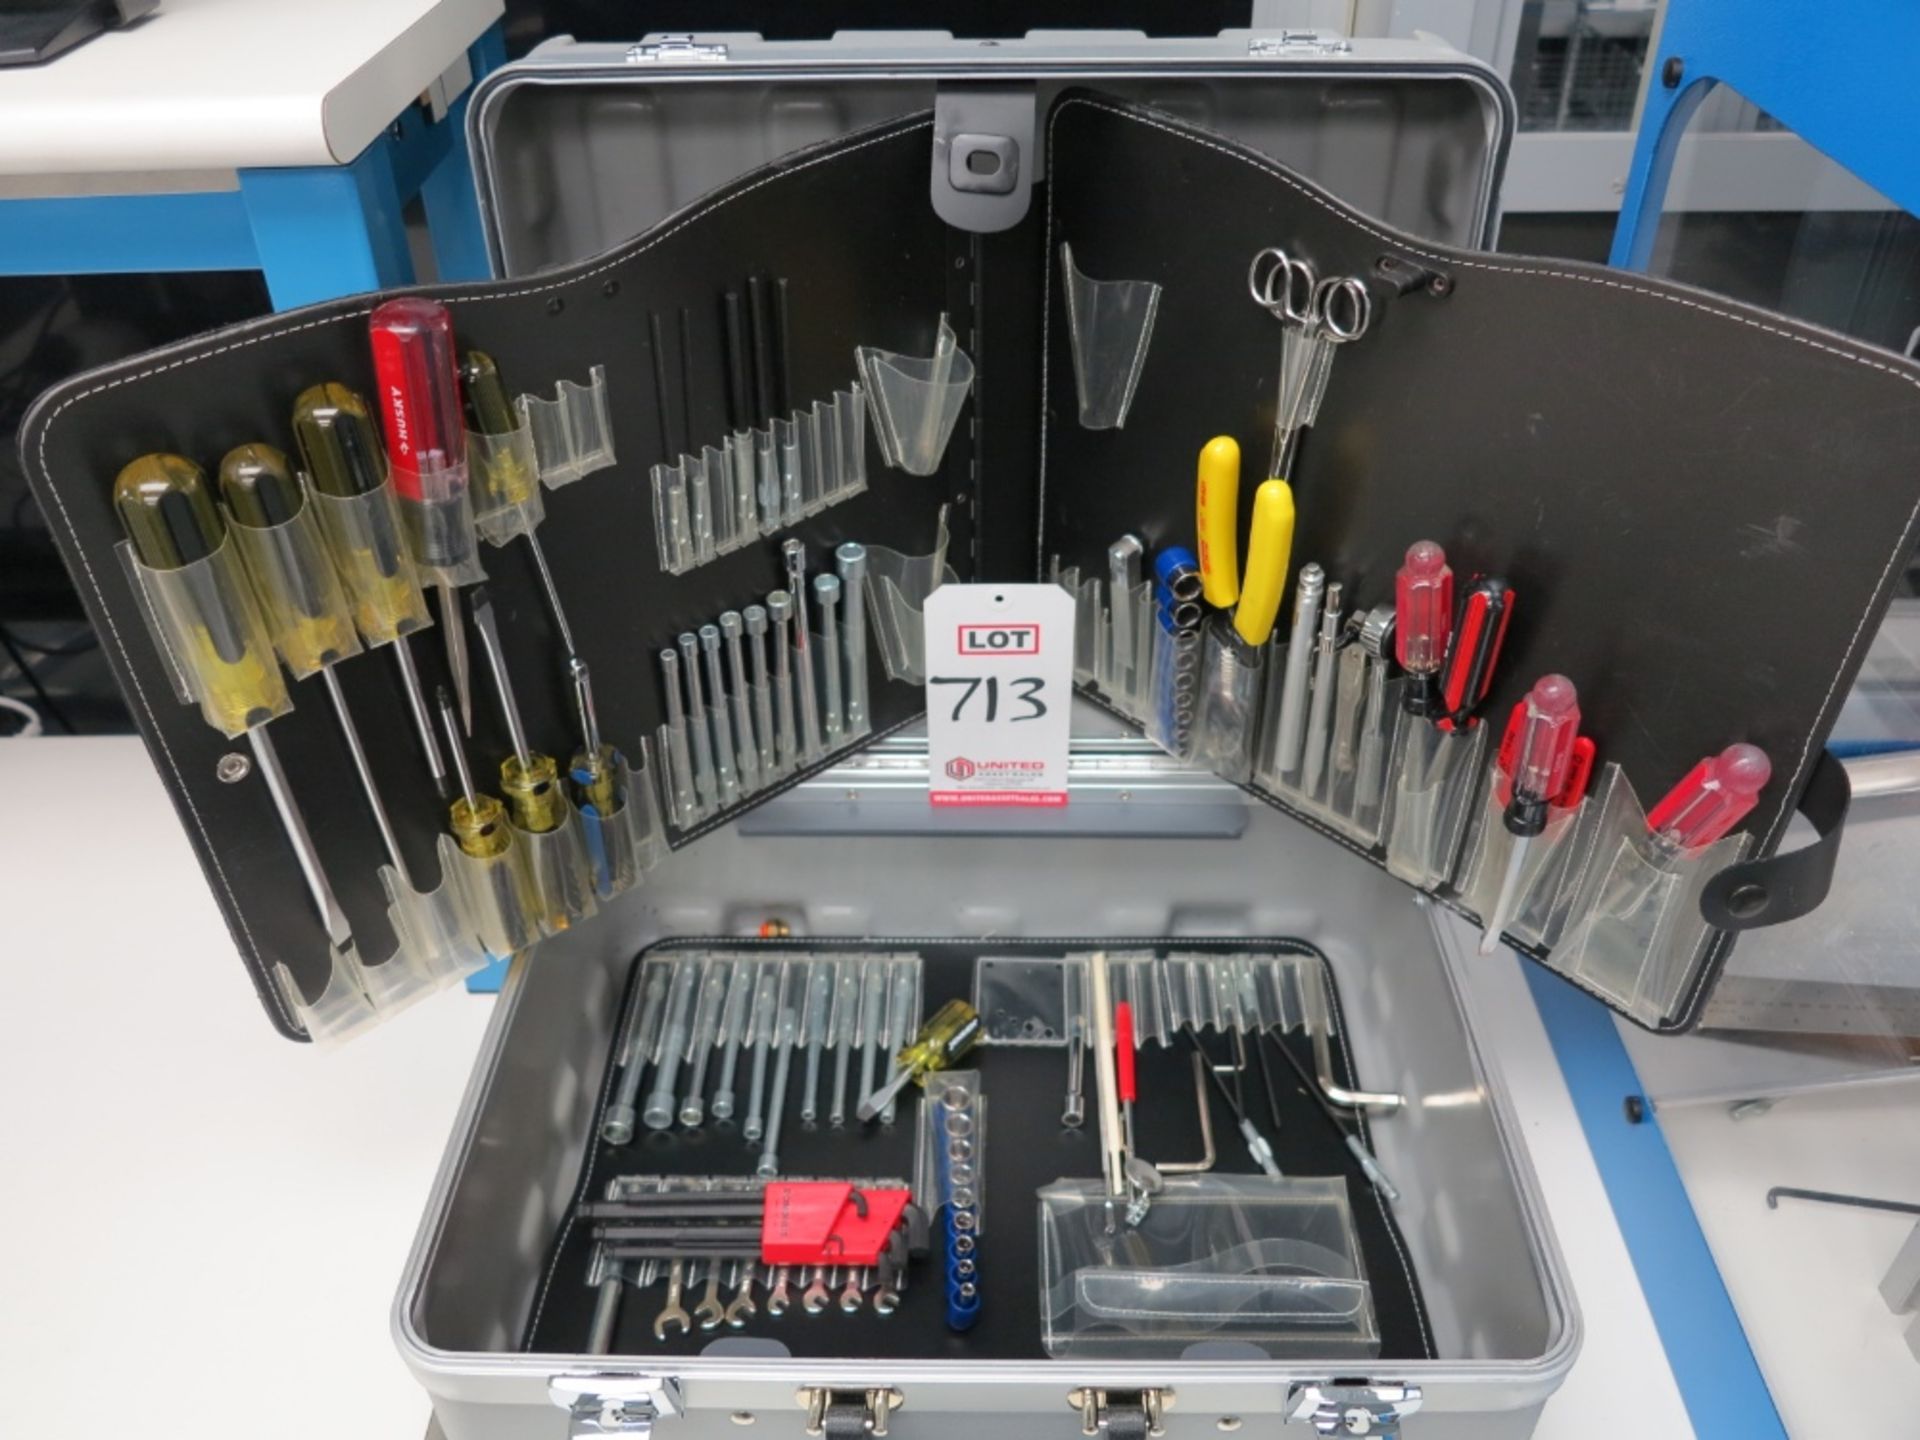 PORTABLE TOOL CASE FULL OF HAND TOOLS